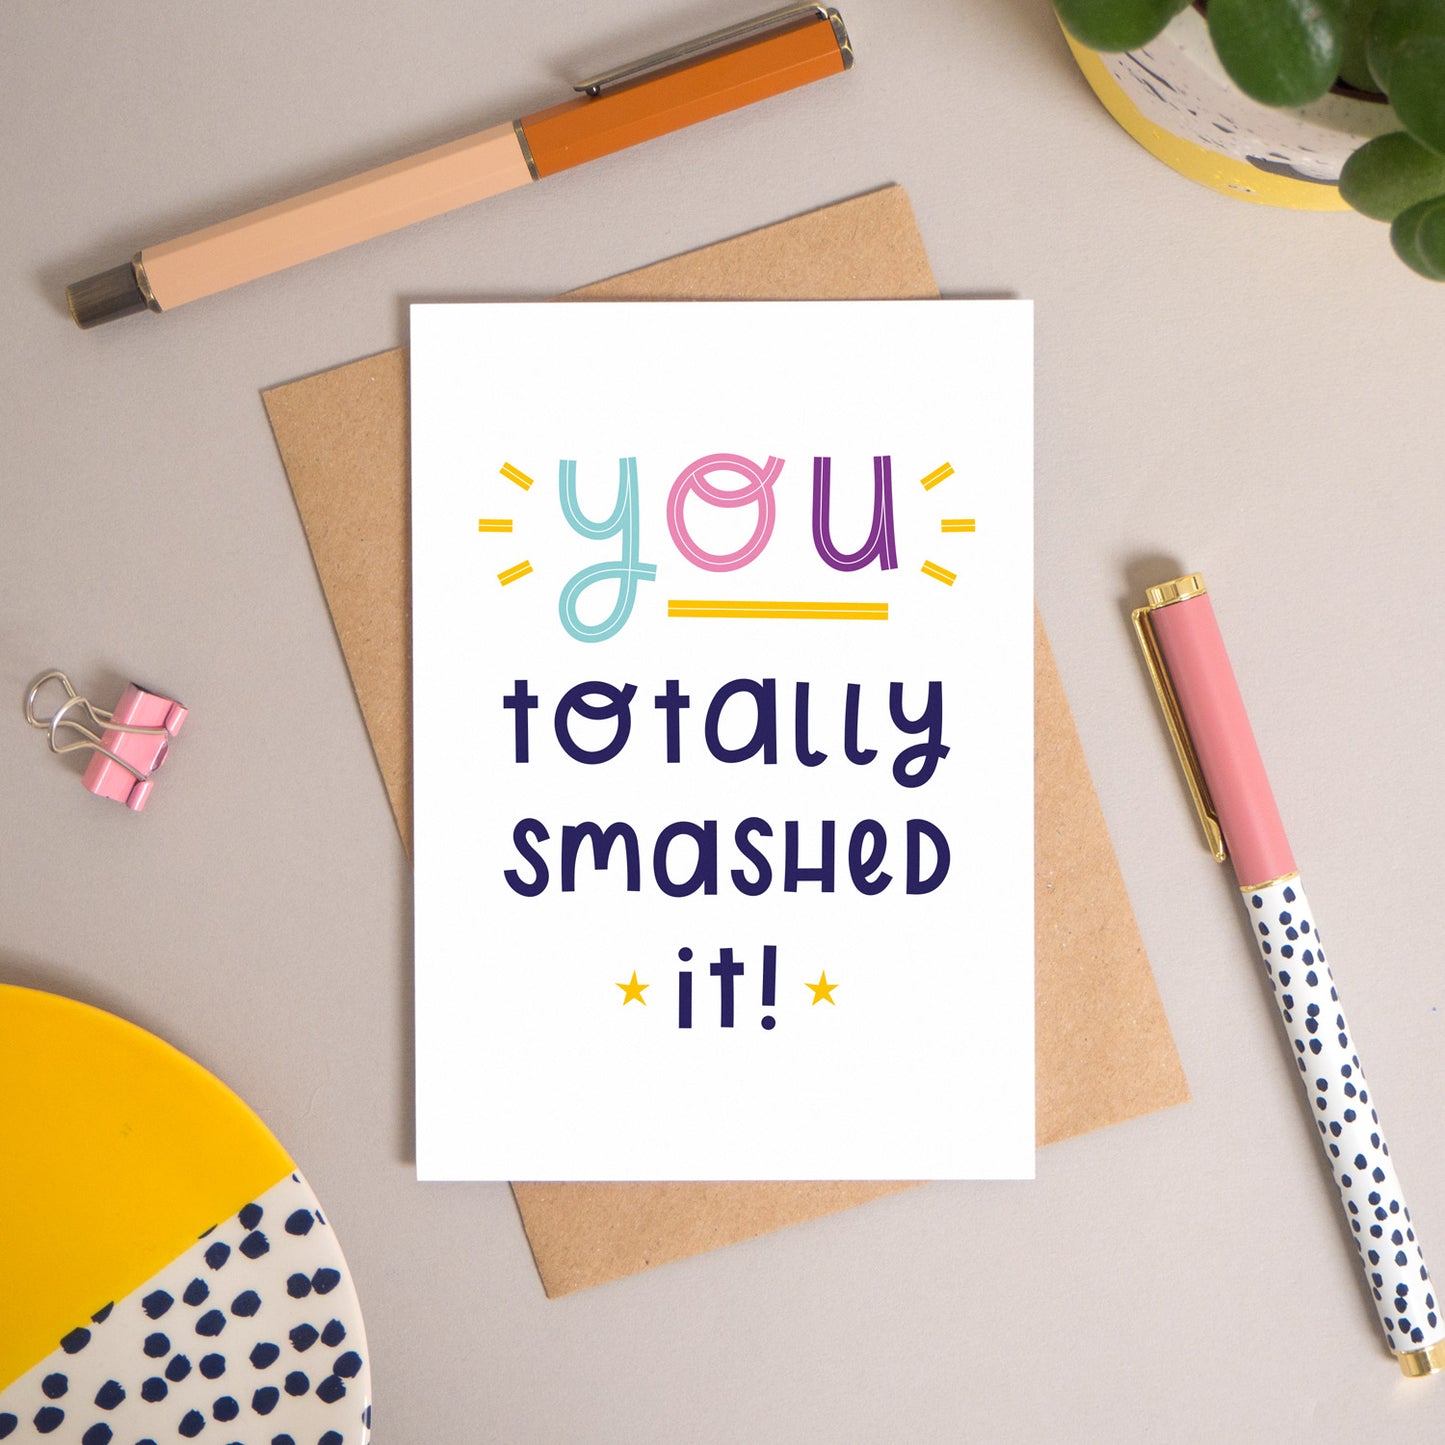 This ‘you totally smashed it’ card has been shot flatlay style looking directly over the top of the card. It is lying flat on it’s kraft brown envelope, on a warm grey background. Surrounding the card are pens, a clip, a plant and a trinket dish. This version of the card is in varying tones of navy and pink, purple and blue.